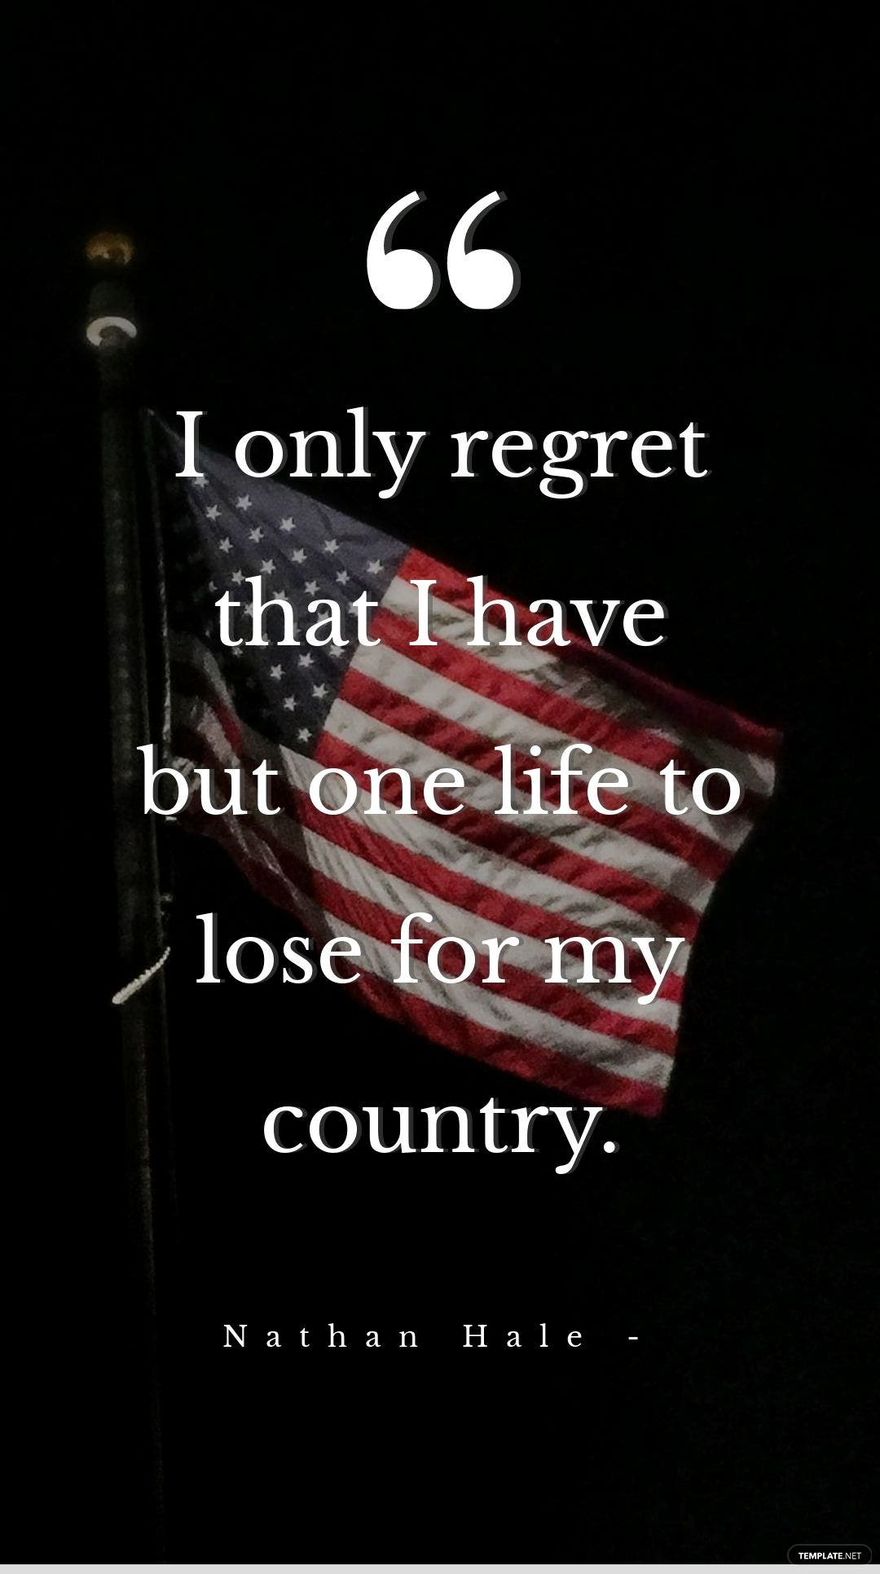 Free Nathan Hale - I only regret that I have but one life to lose for my country. in JPG